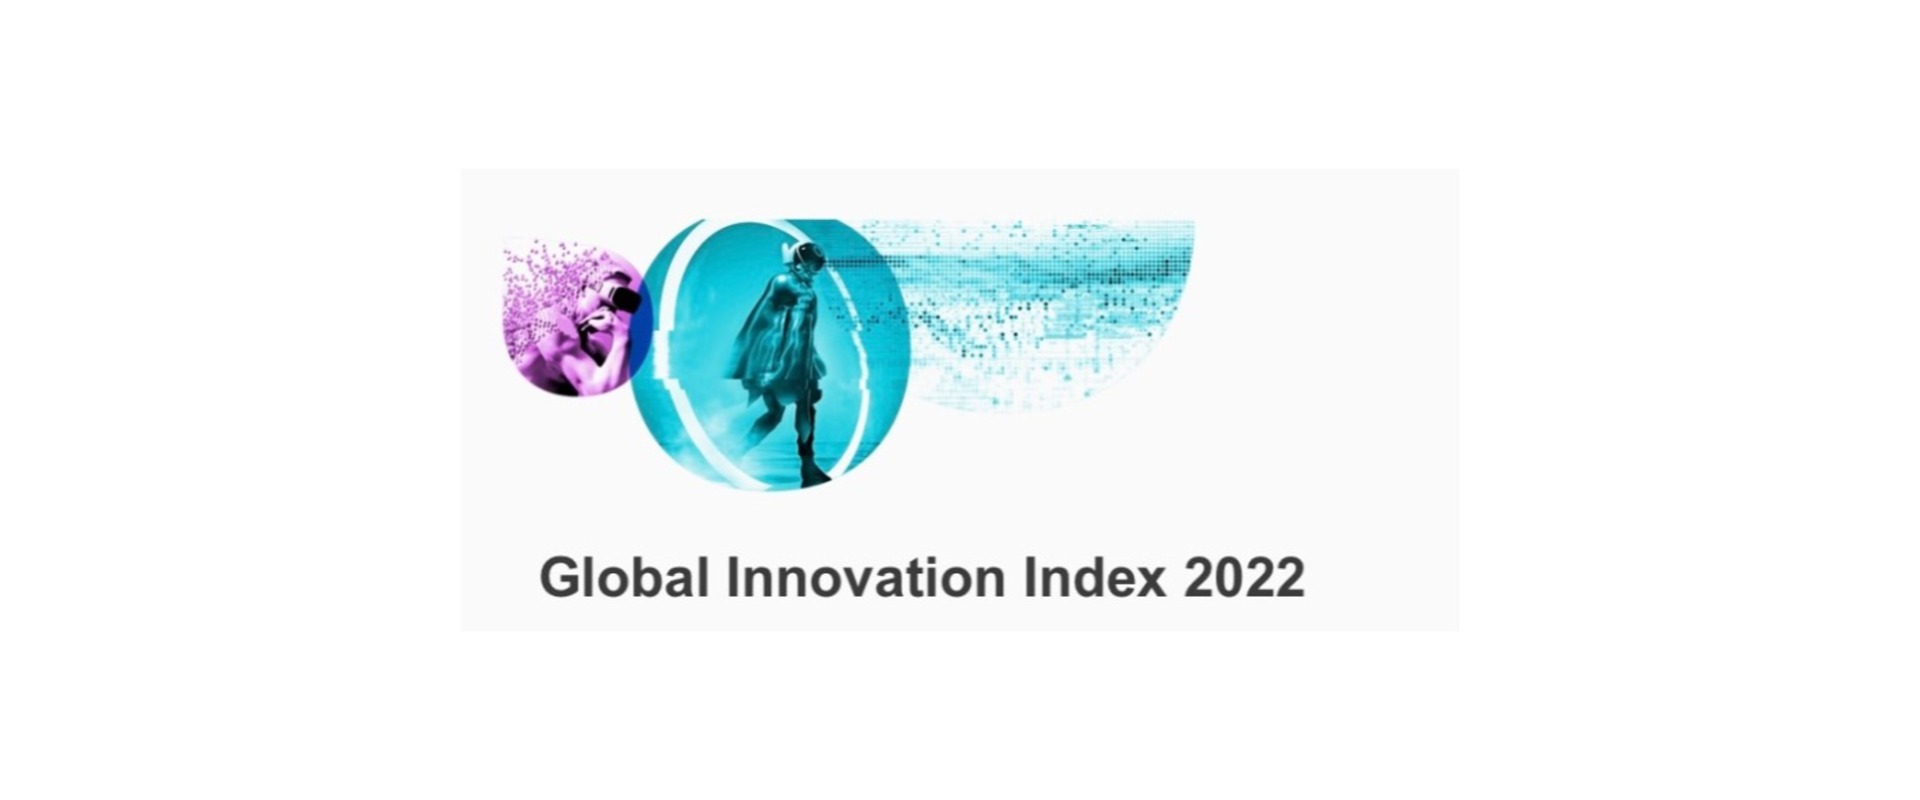 Global Innovation Index 2022: Mauritius at top stop in Africa